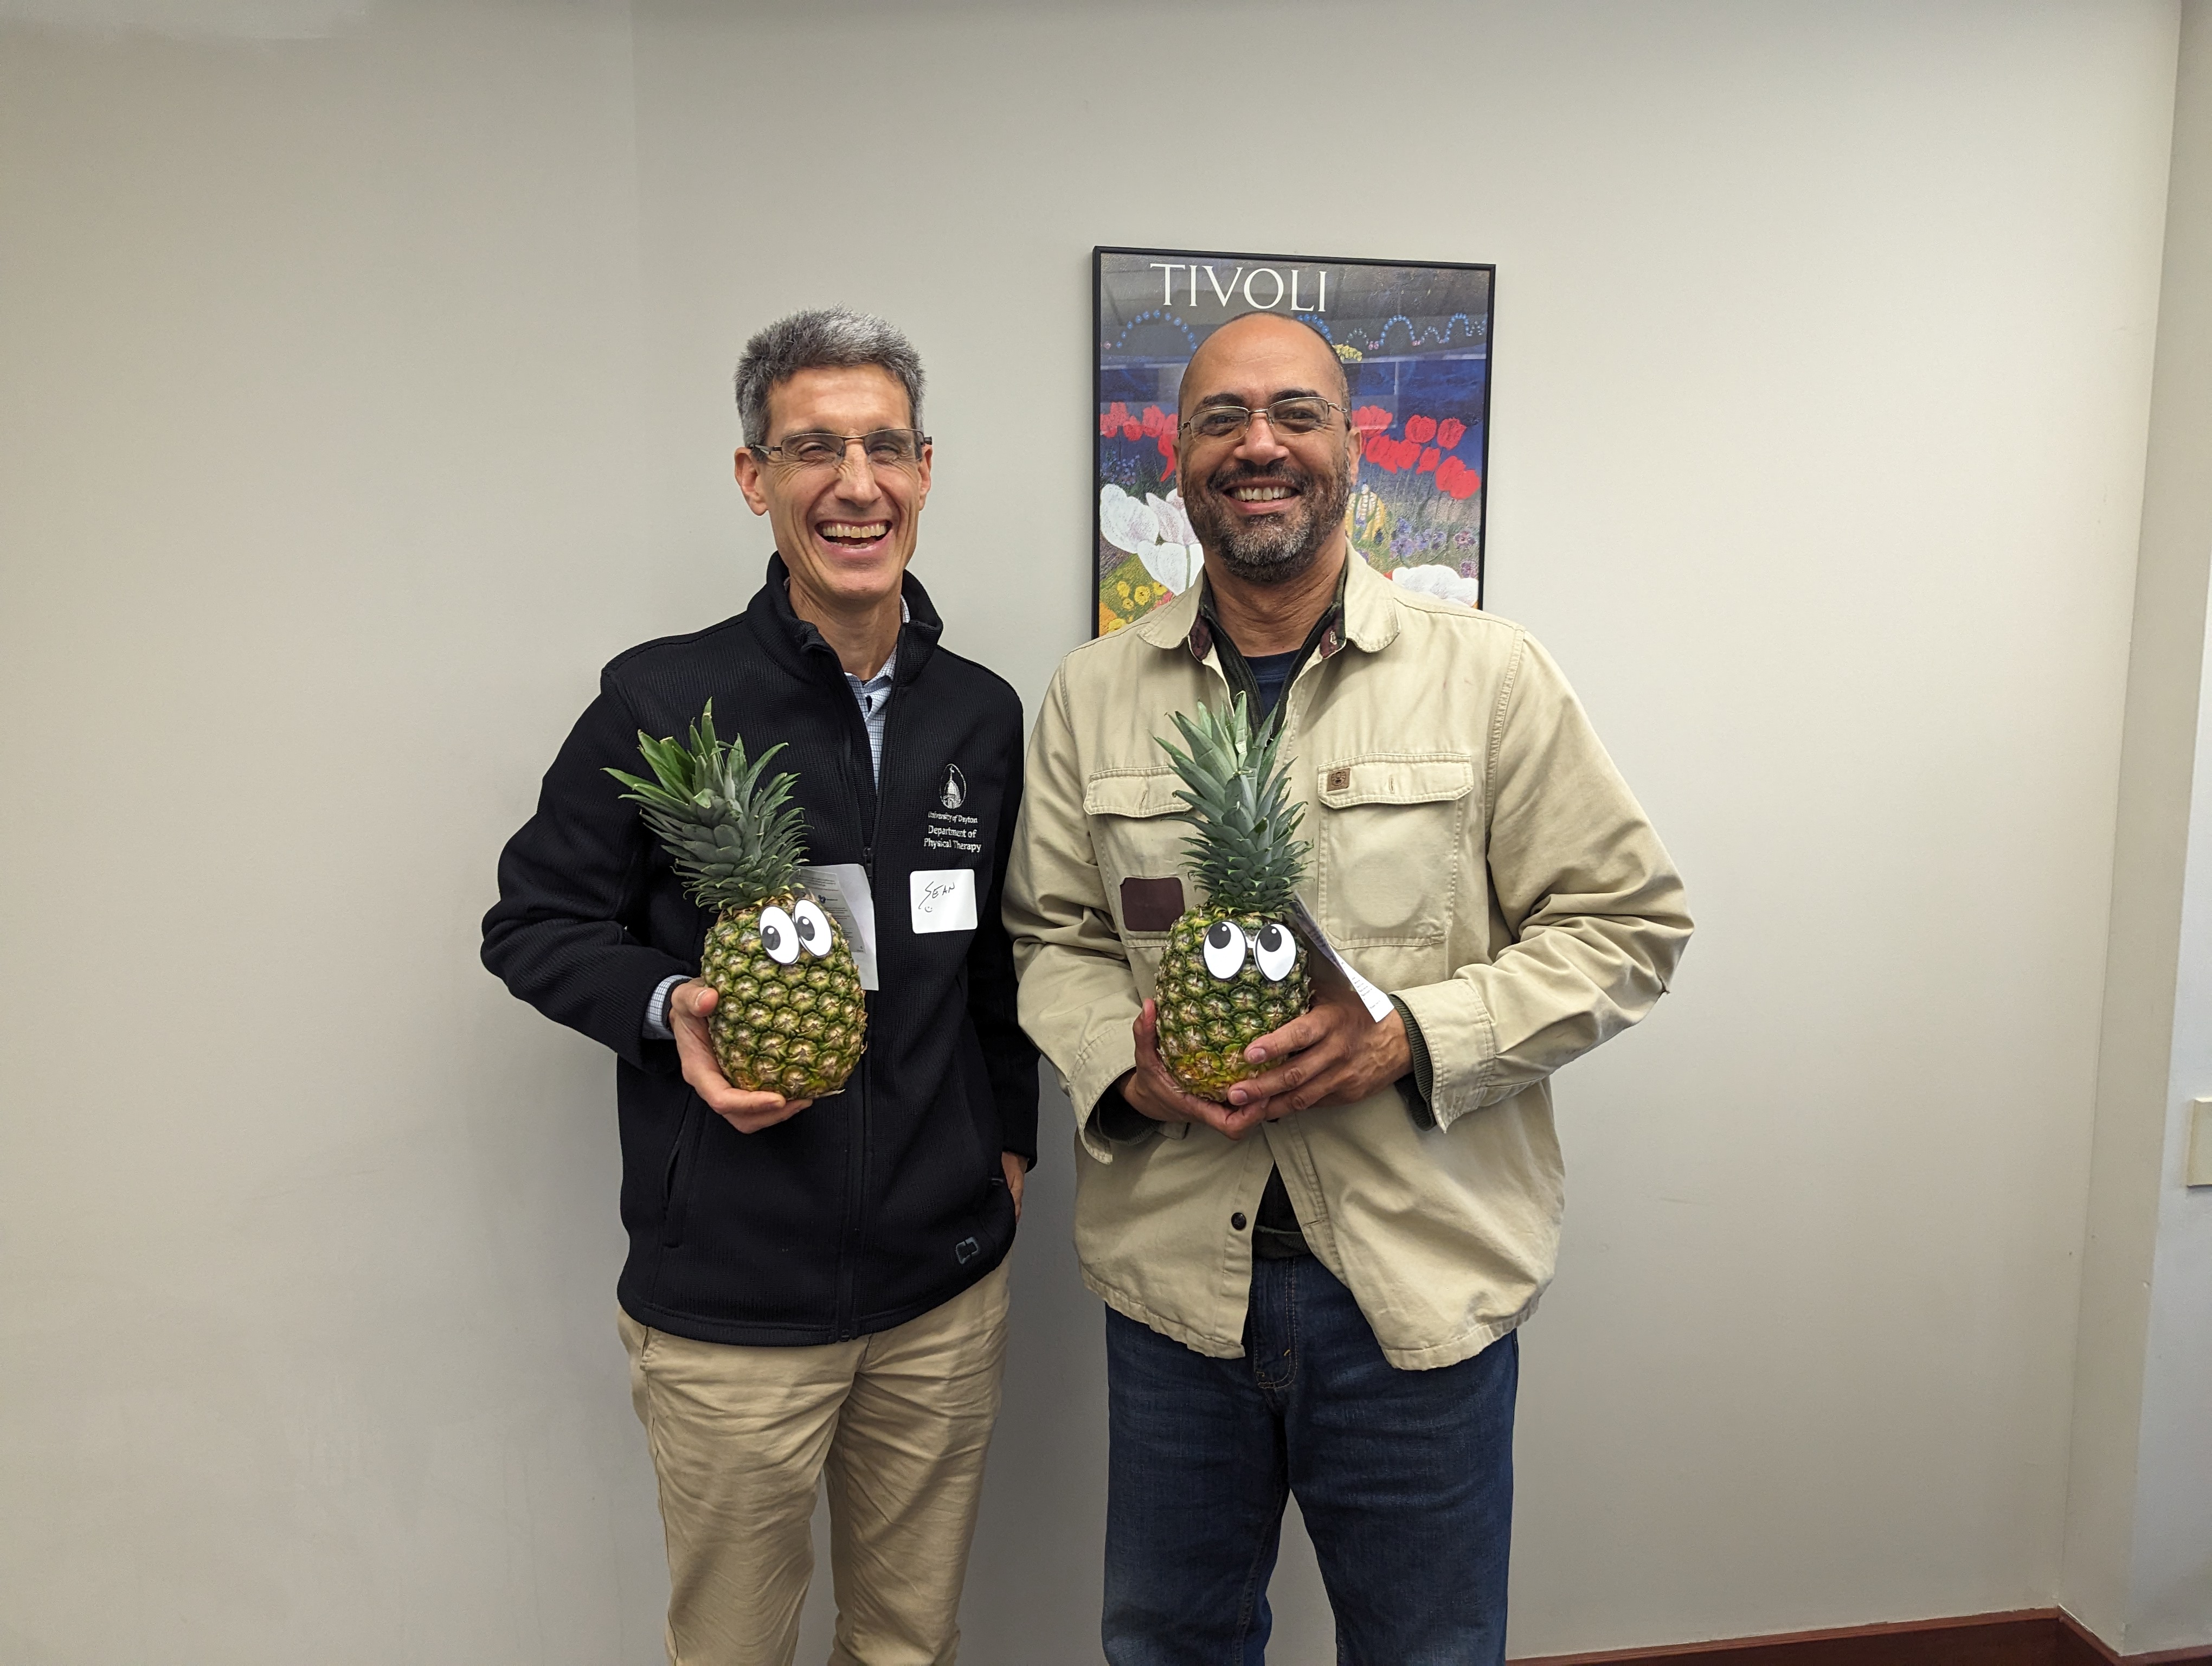 Faculty members Sean Gallivan and Robert Menafee pose with a pineapple and diploma to signify graduation from ATLS.